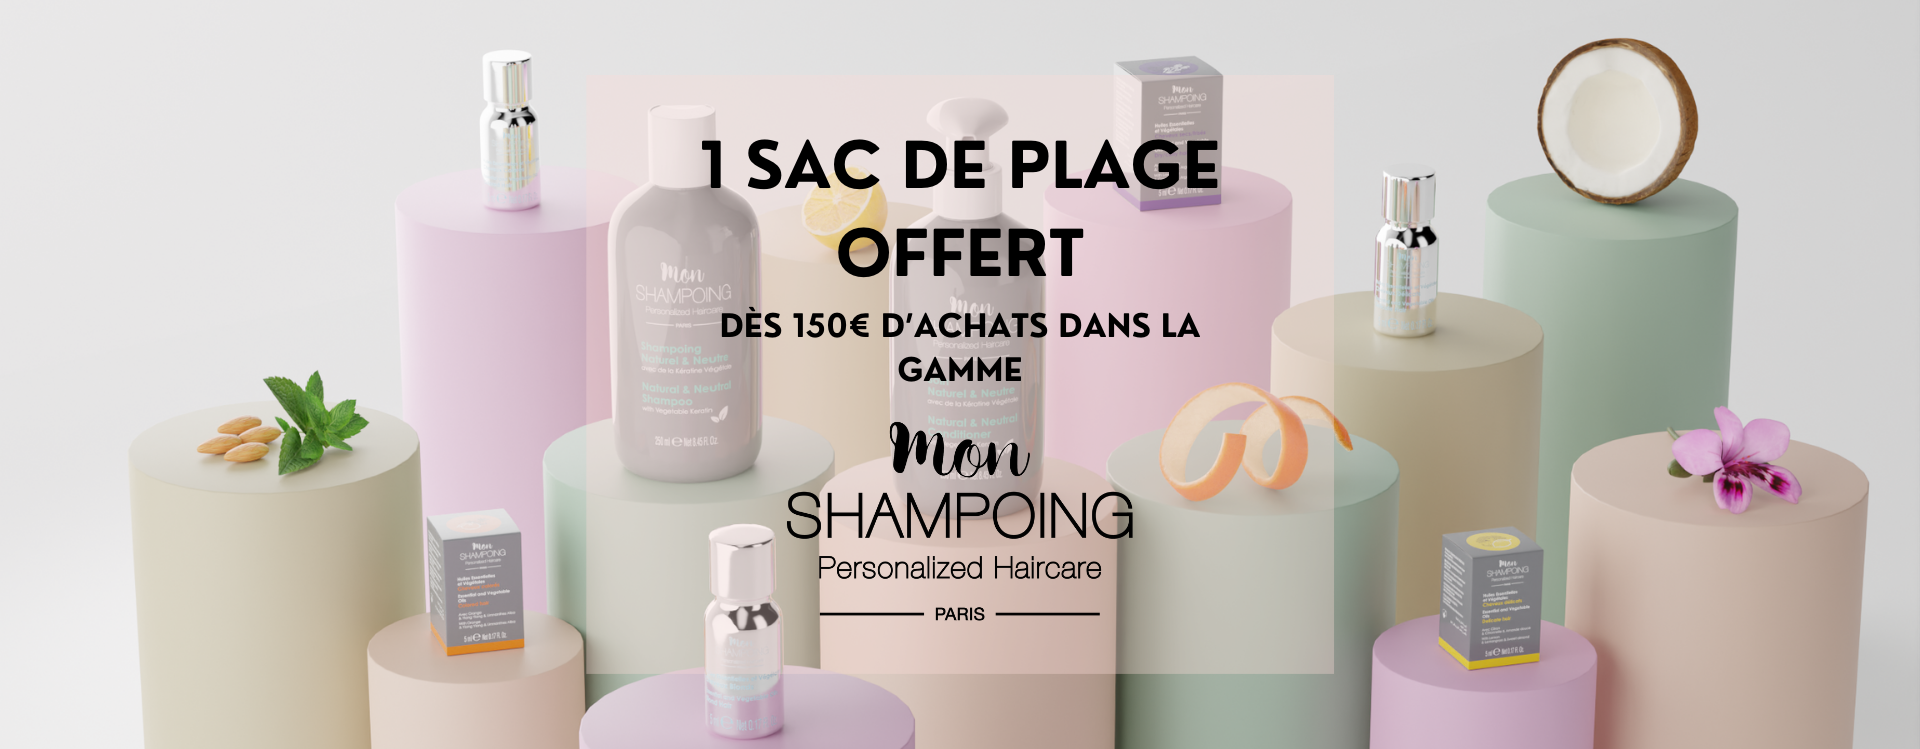 OFFRE SAC PLAGE MON SHAMPOING